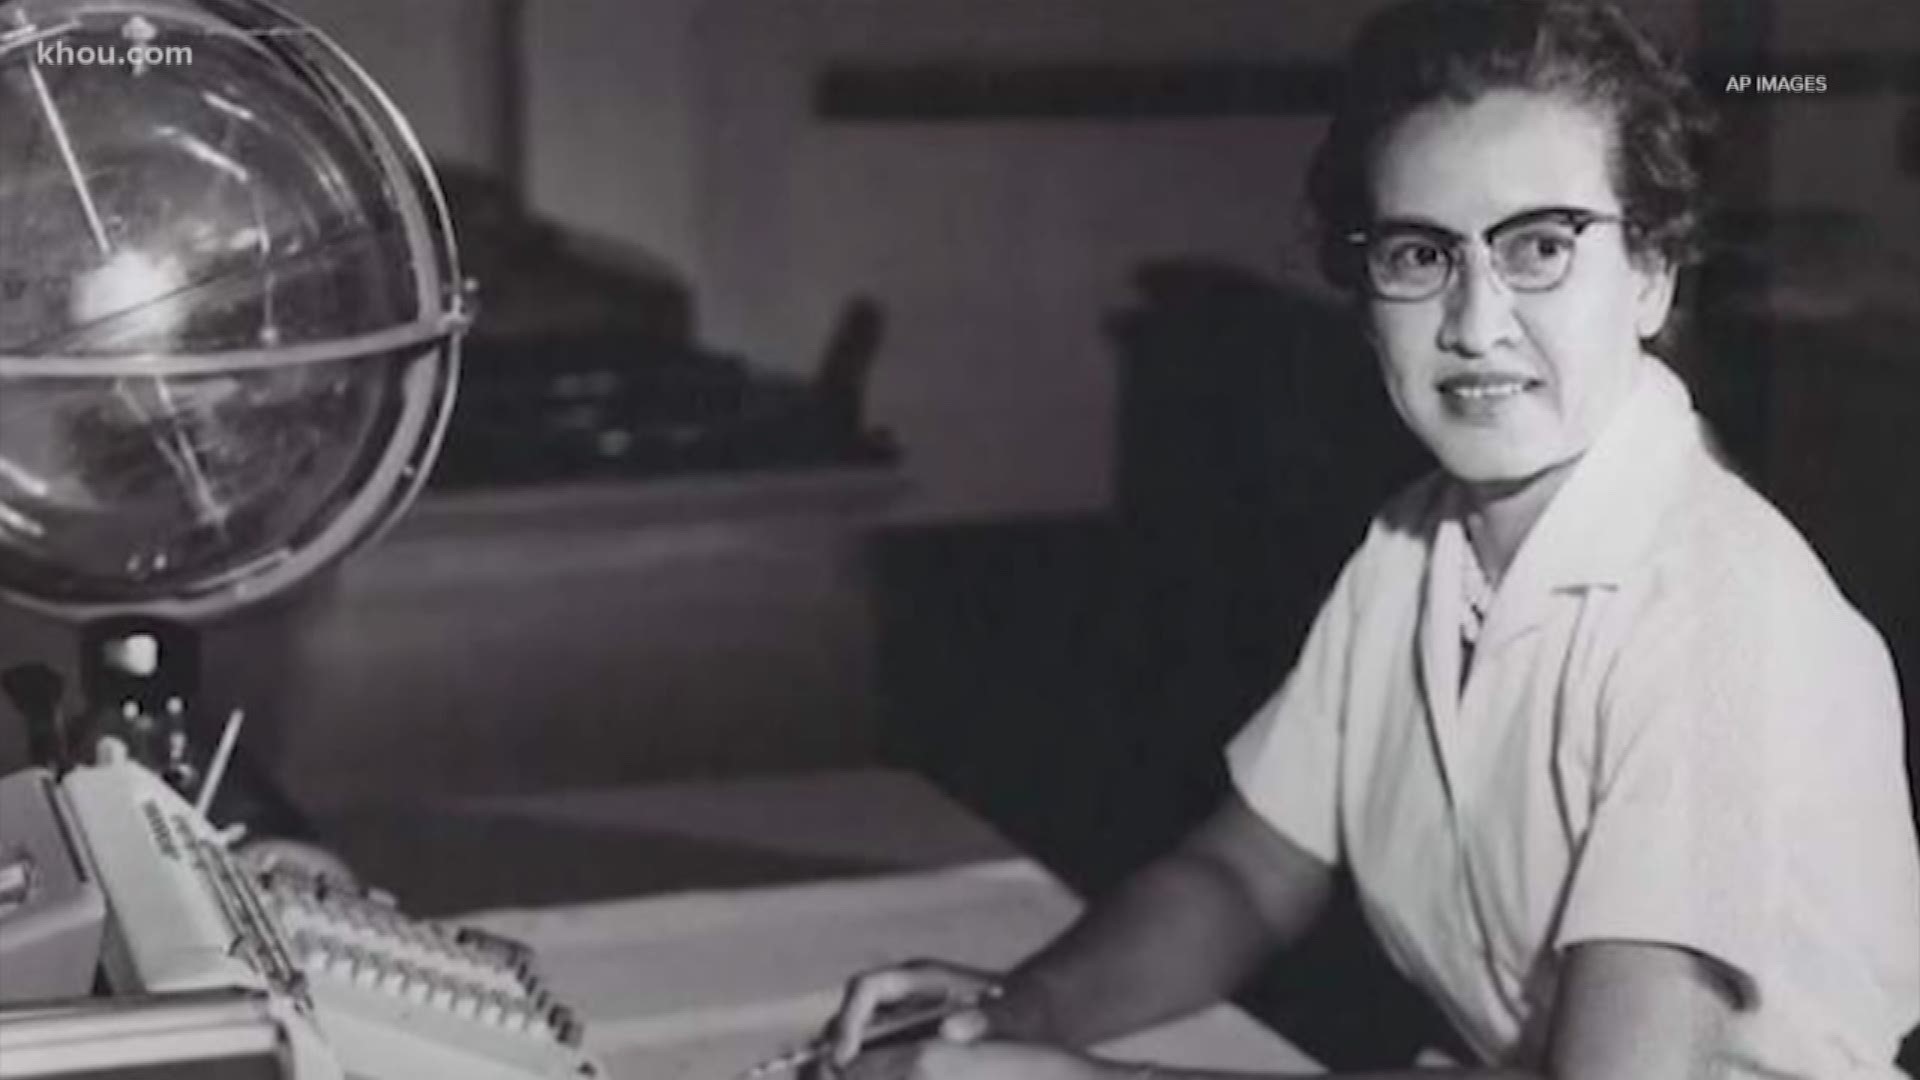 Katherine Johnson calculated trajectories for multiple NASA space missions including the first human spaceflight by an American.